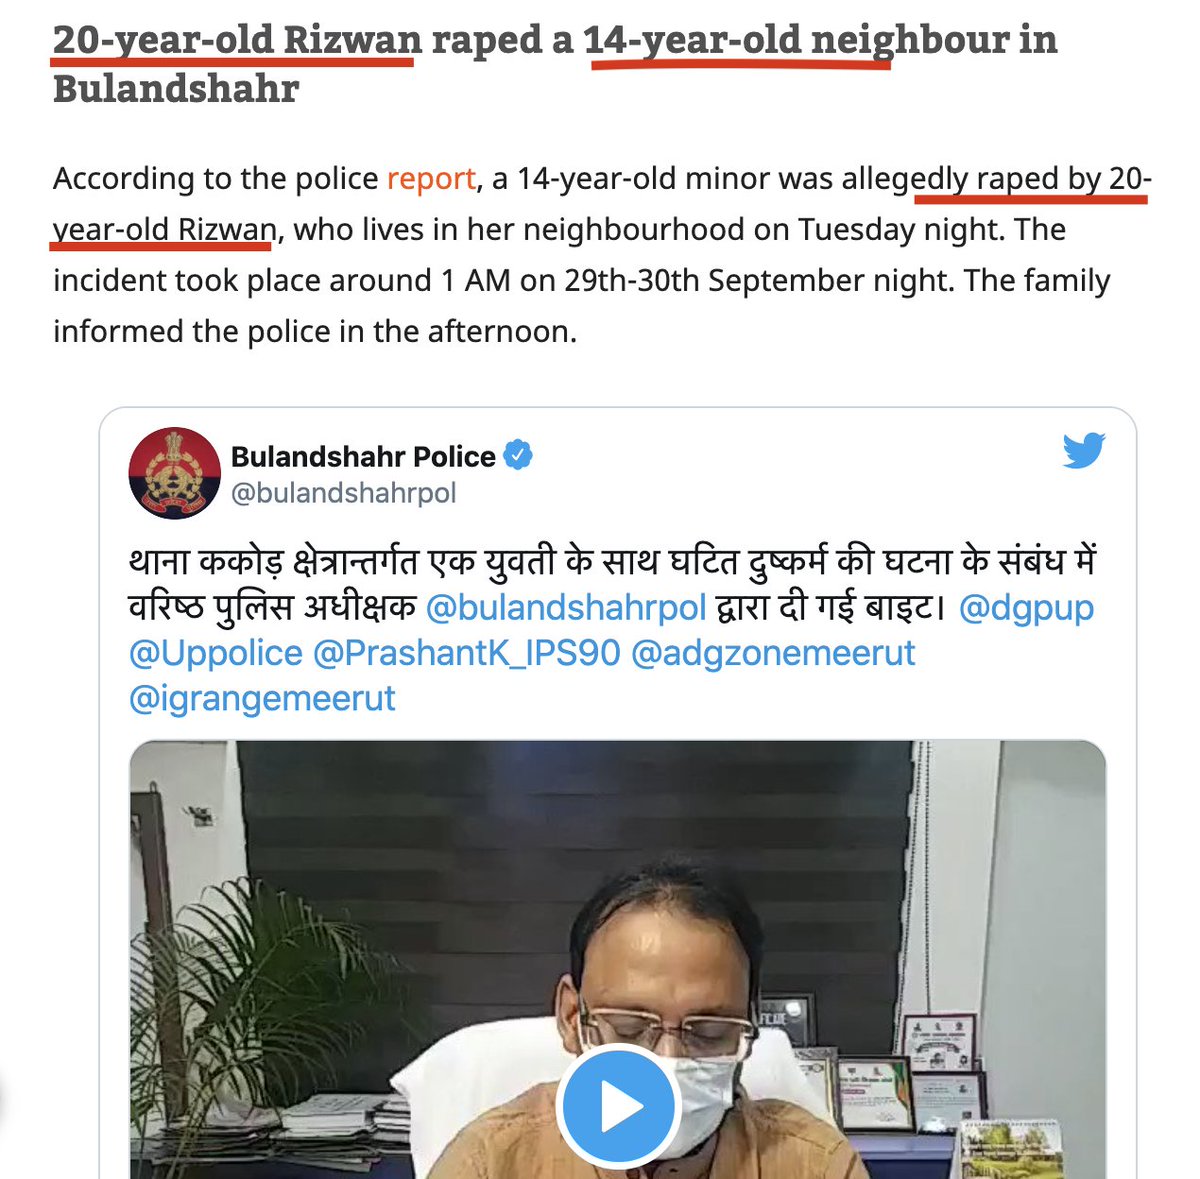 6/15Here the Rapist again is RIZWAN. Raped a 14 year old minor and this happened in Broad daylight.What makes her ignoring this, Allah knows!  @Soumyadipta  @vivekagnihotri  @Rajput_Ramesh  @MODIfiedVikas  https://twitter.com/rohini_sgh/status/1311395246685605888?s=20